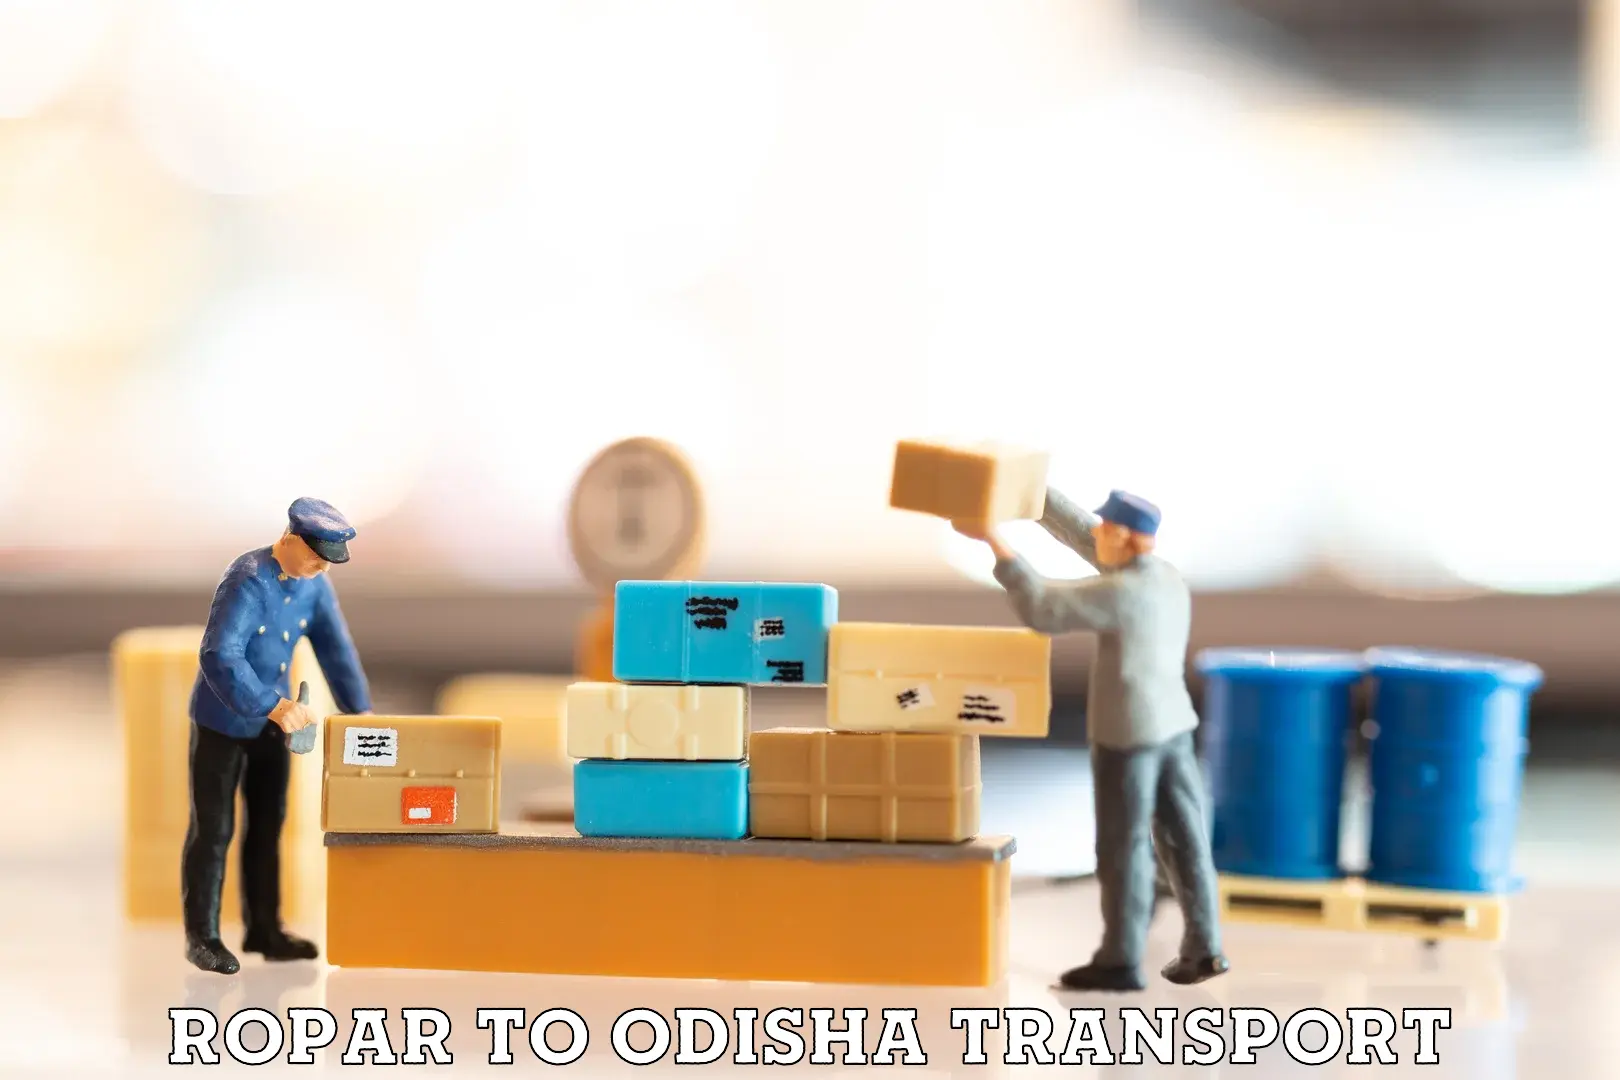 Daily transport service Ropar to Gumadera